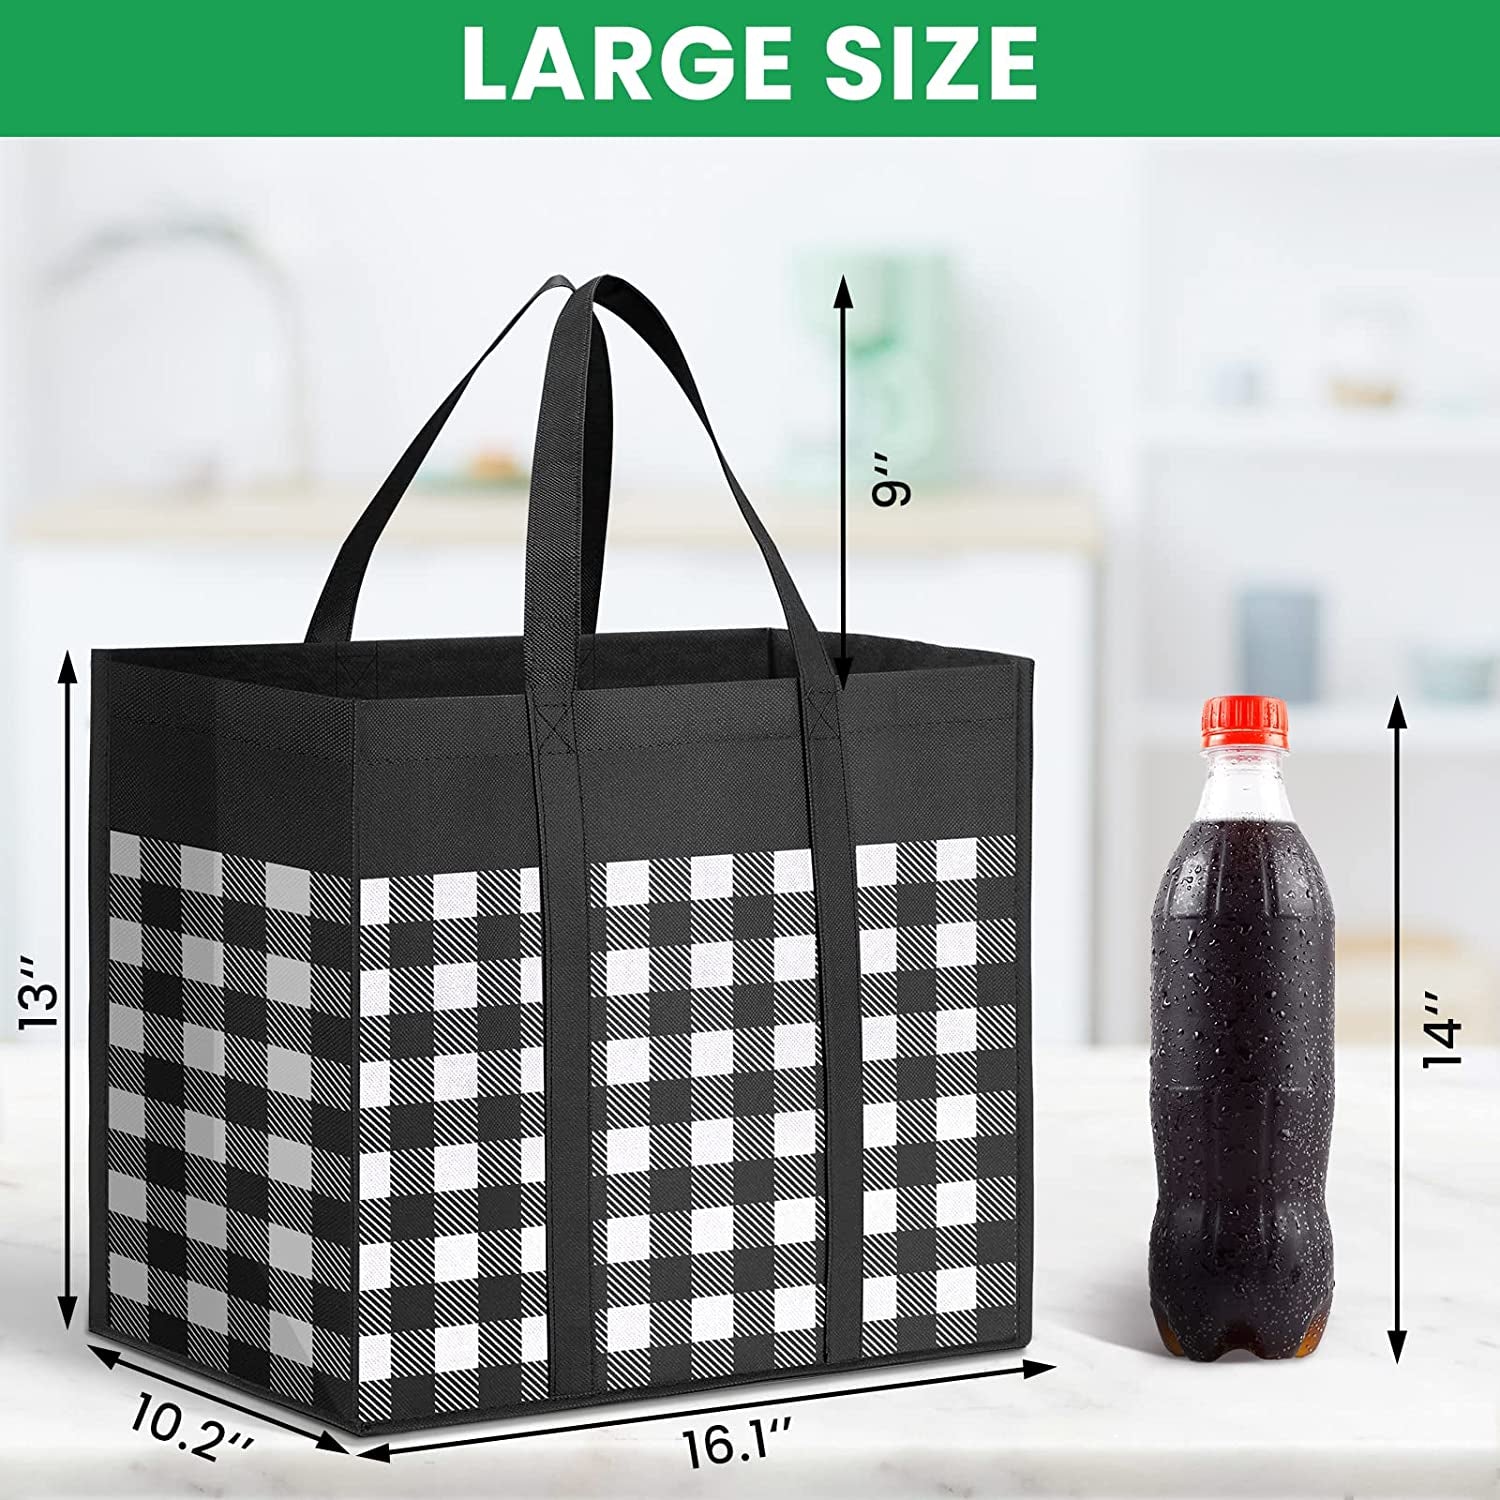 10-Pack Large Reusable Grocery Bags - Everyday-Sales.com